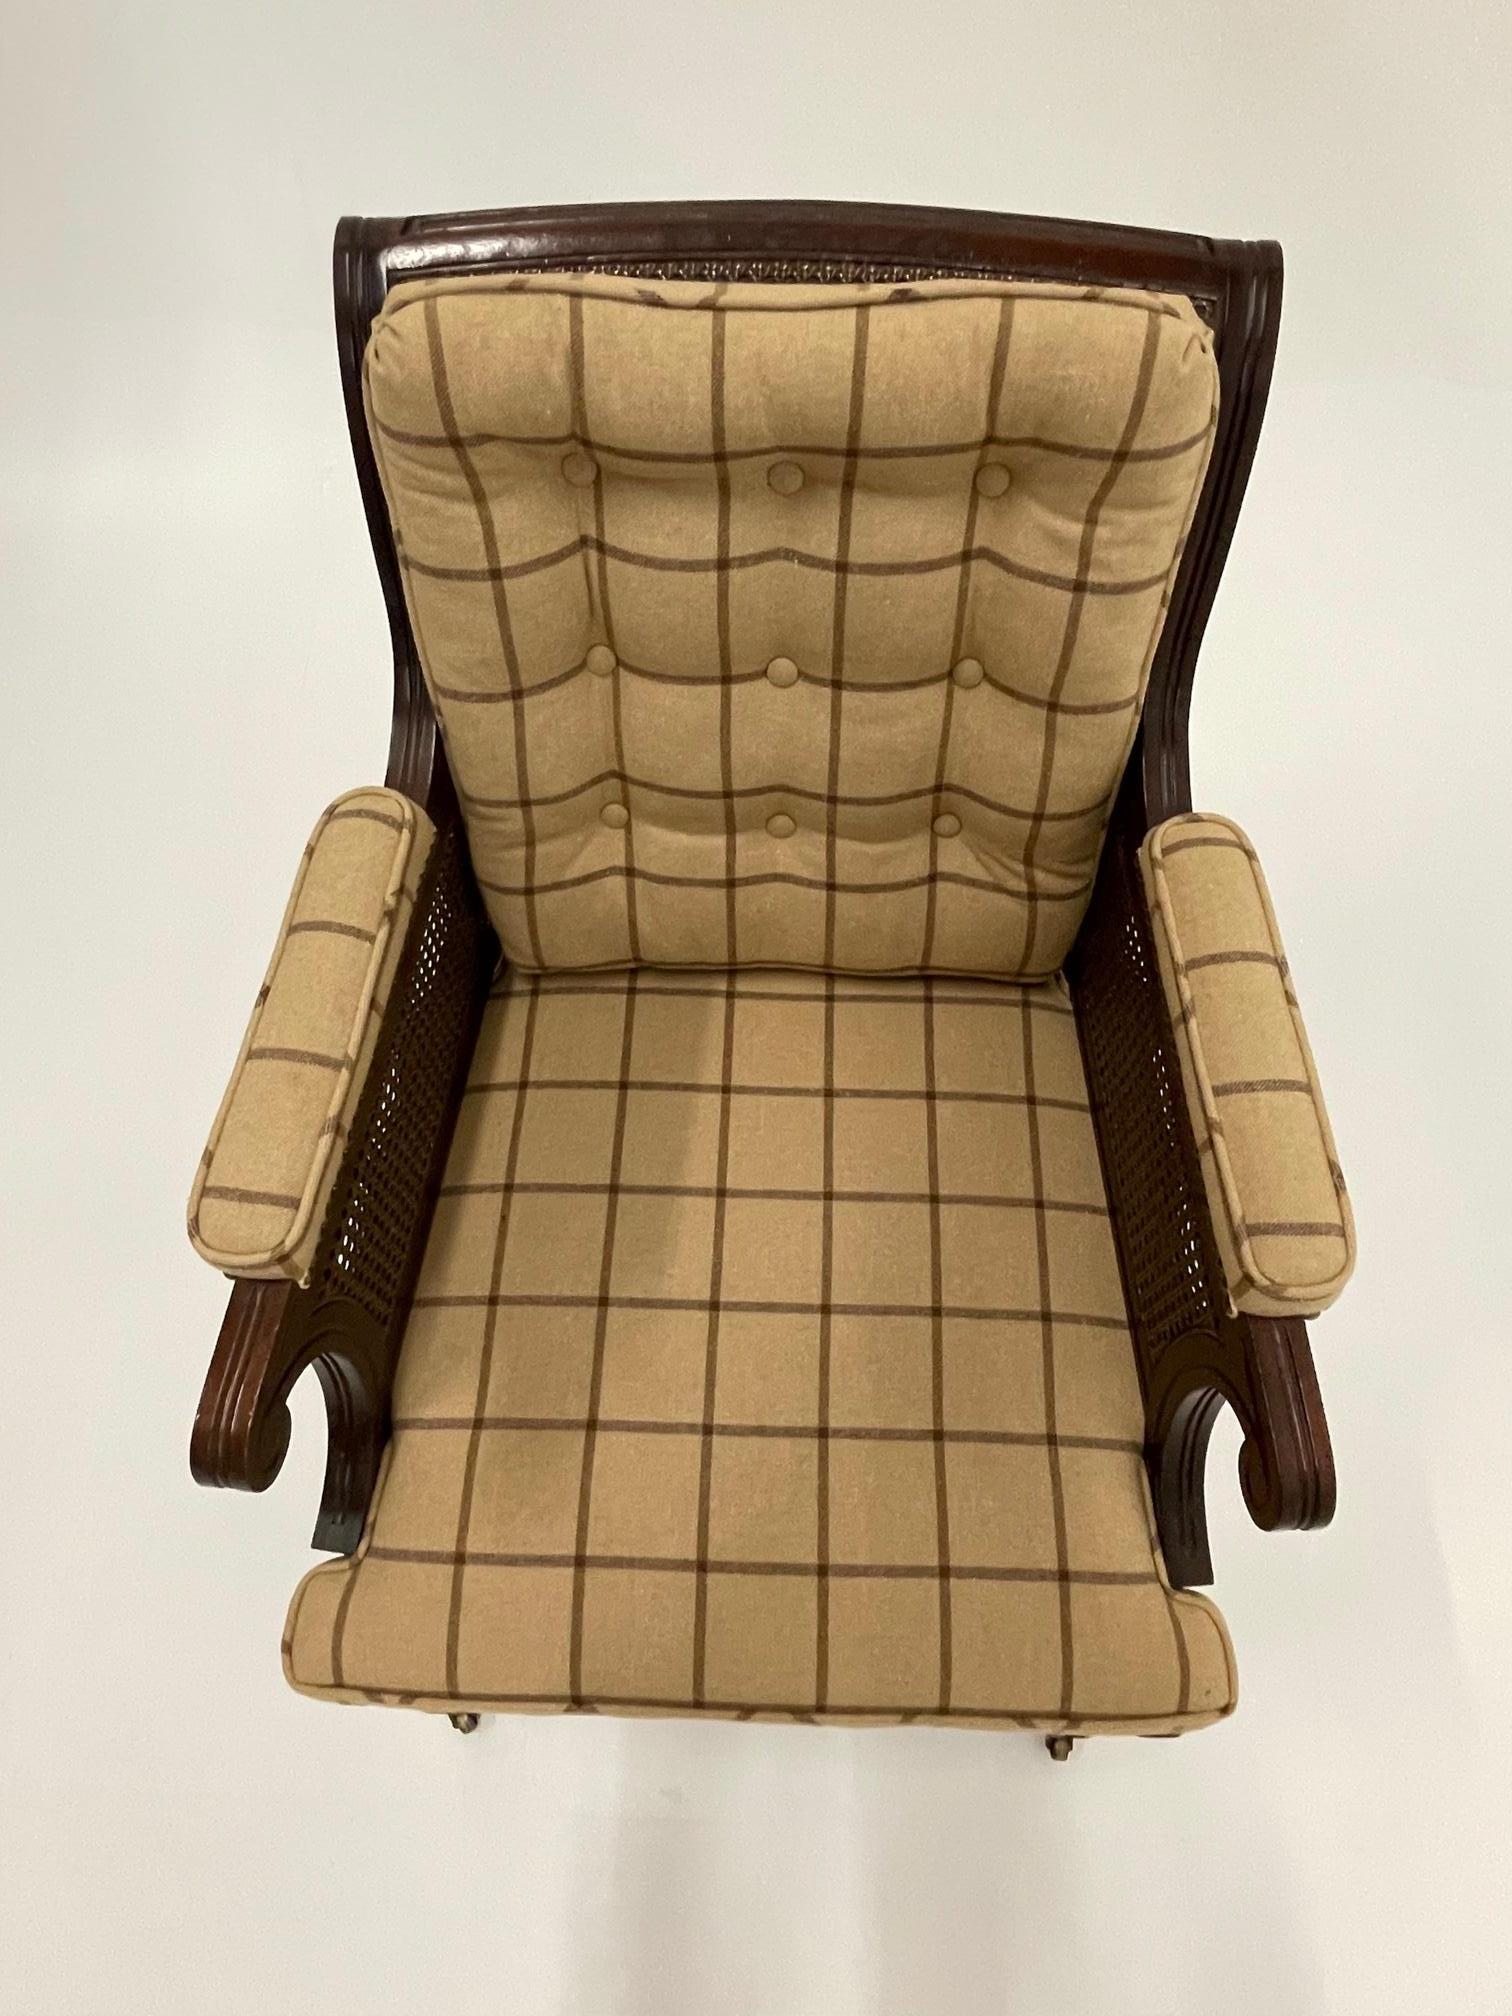 North American Debonair Mahogany Club Chair by Baker with Camel & Brown Plaid Upholstery